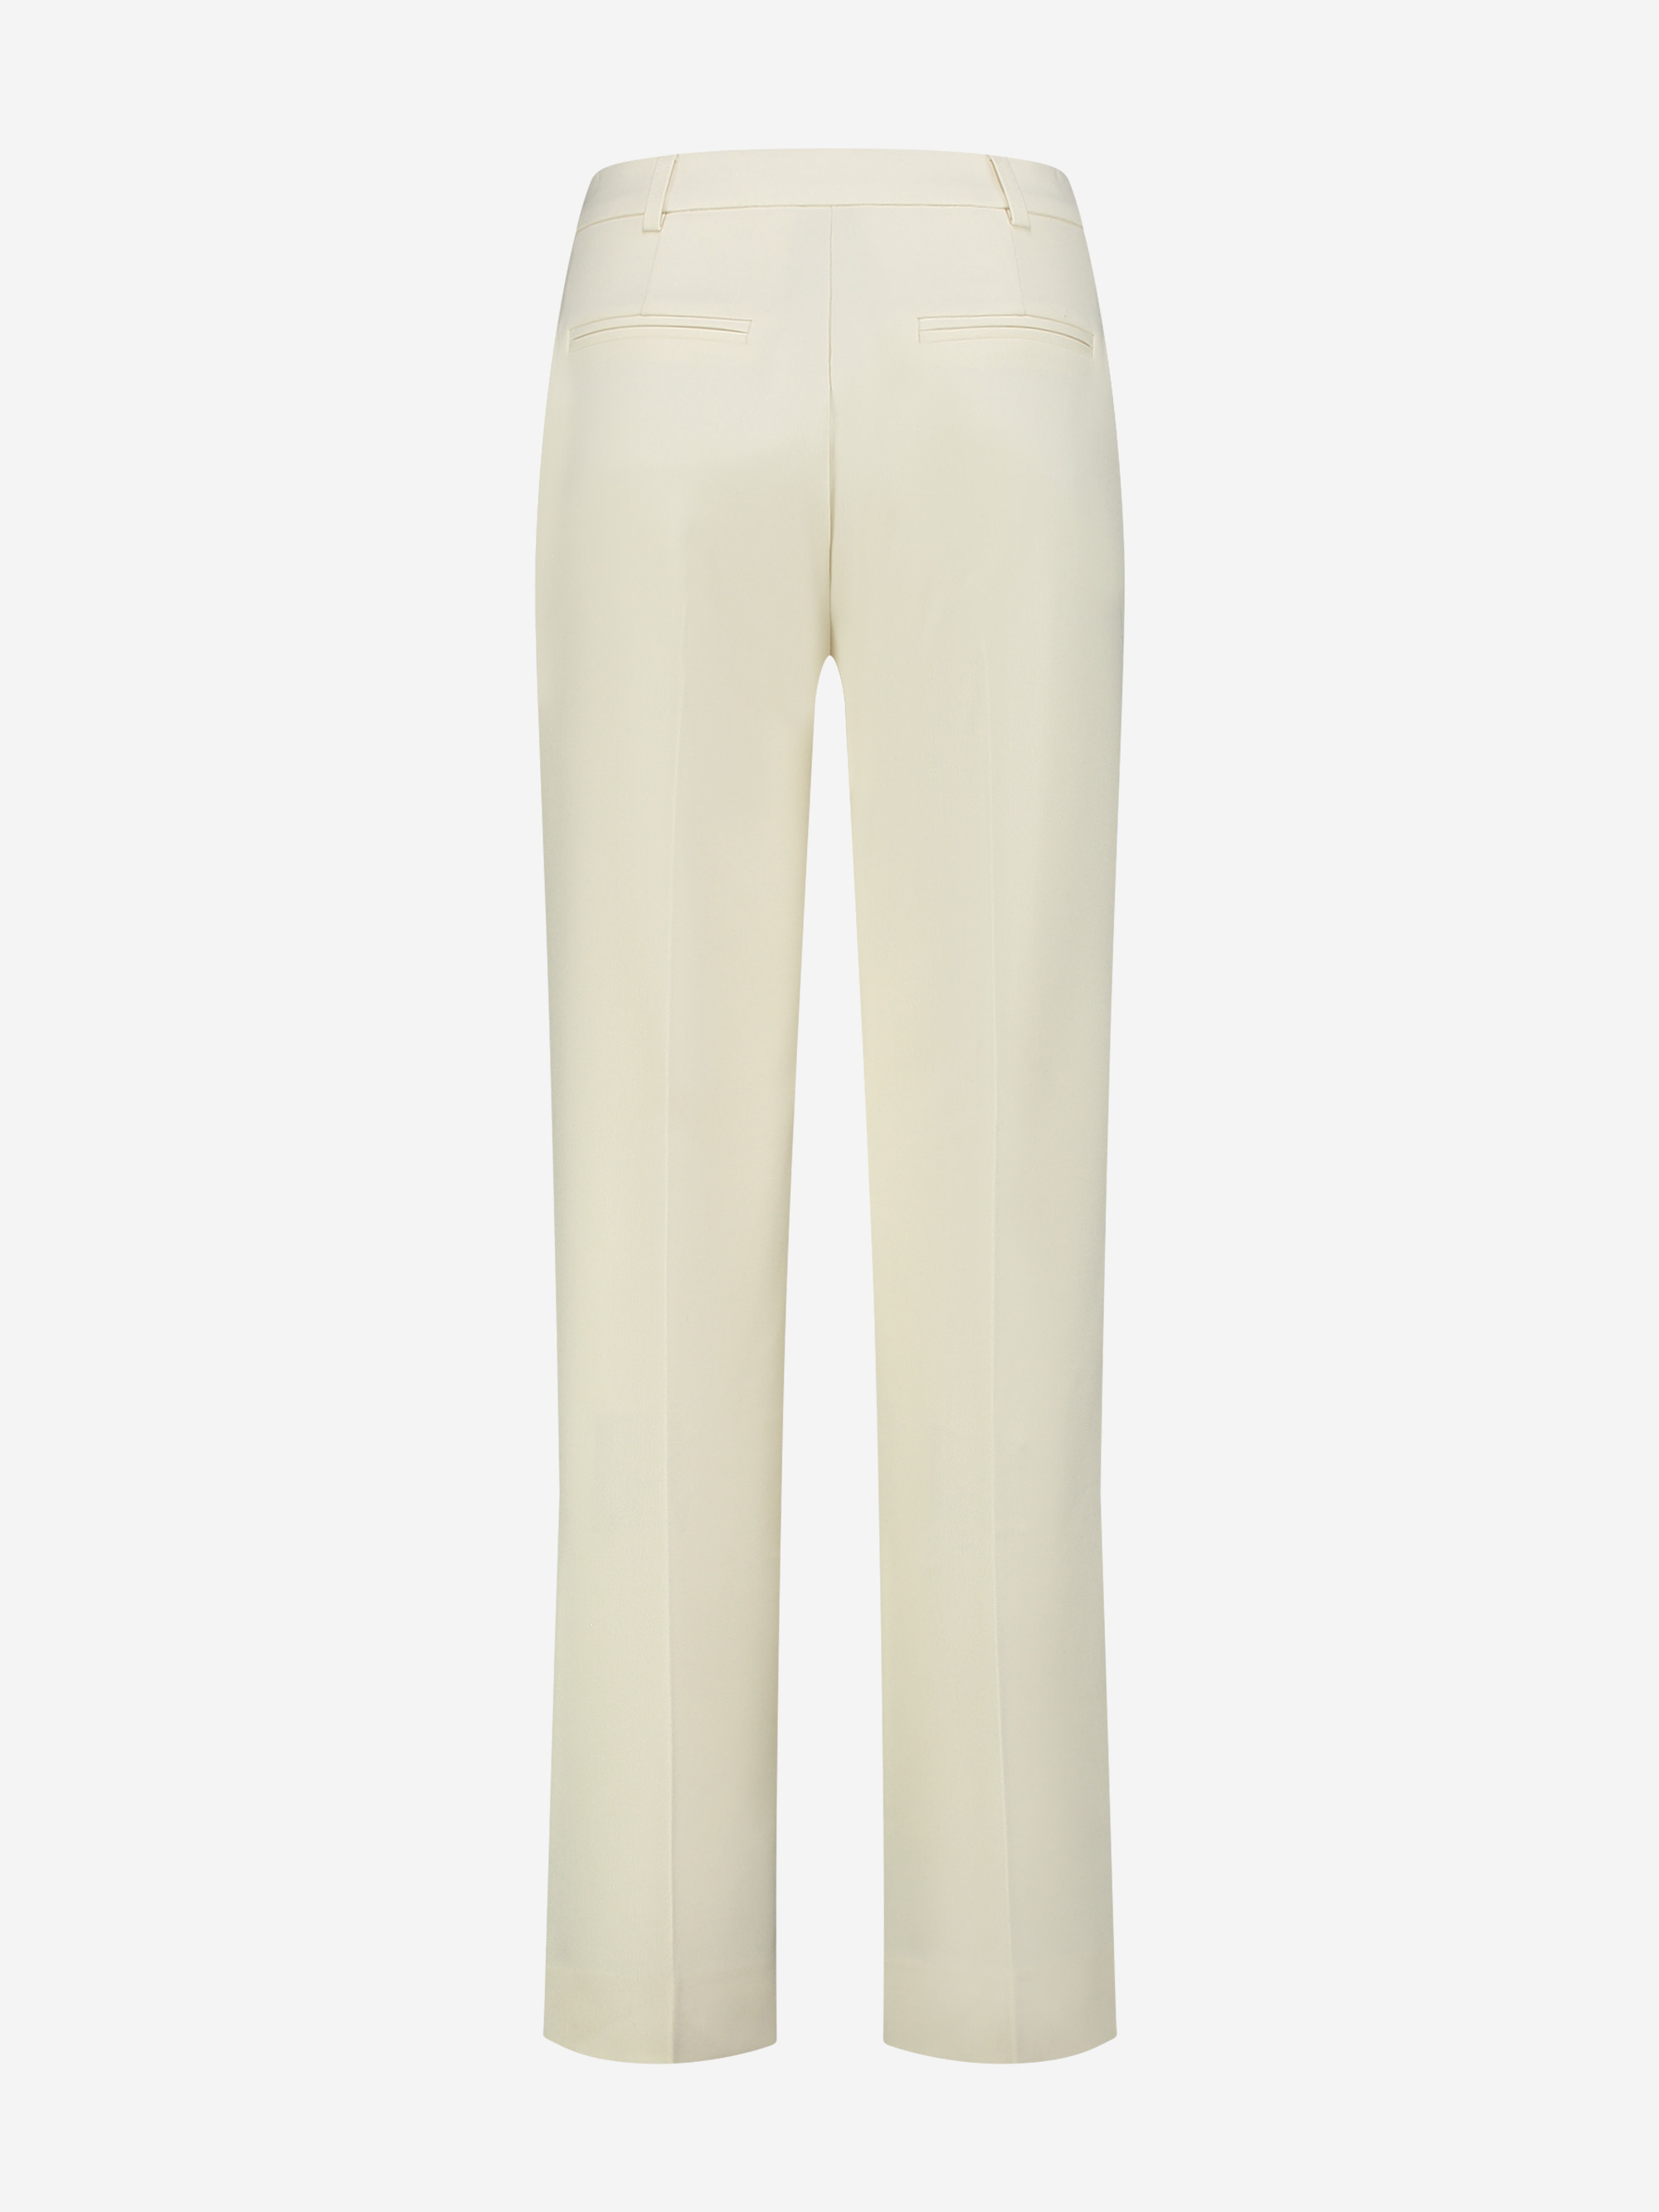 Straight pants with Mid rise